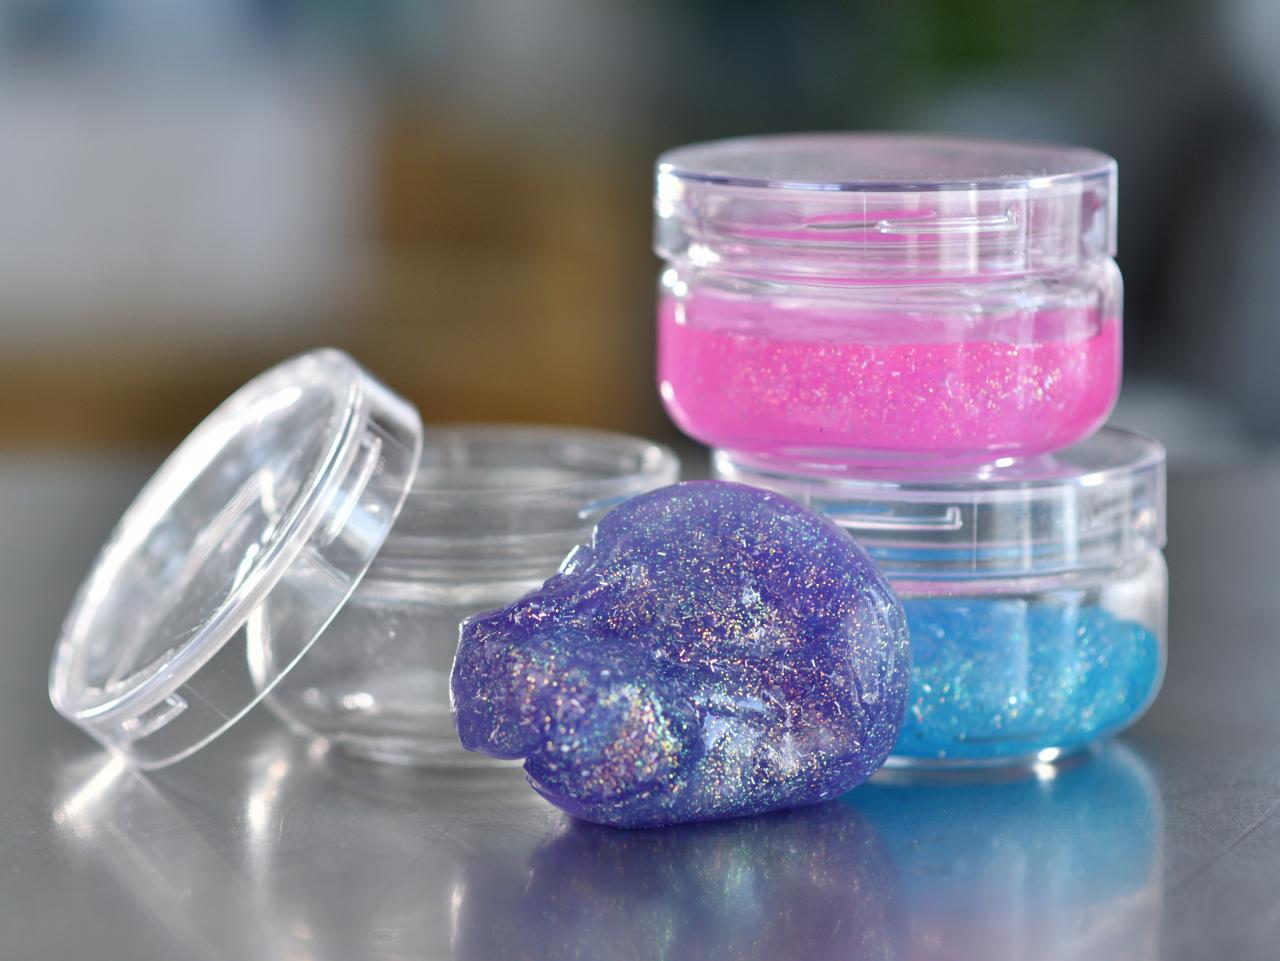 Glitter Glue Slime Just Two Ingredients with Easy Clean Up